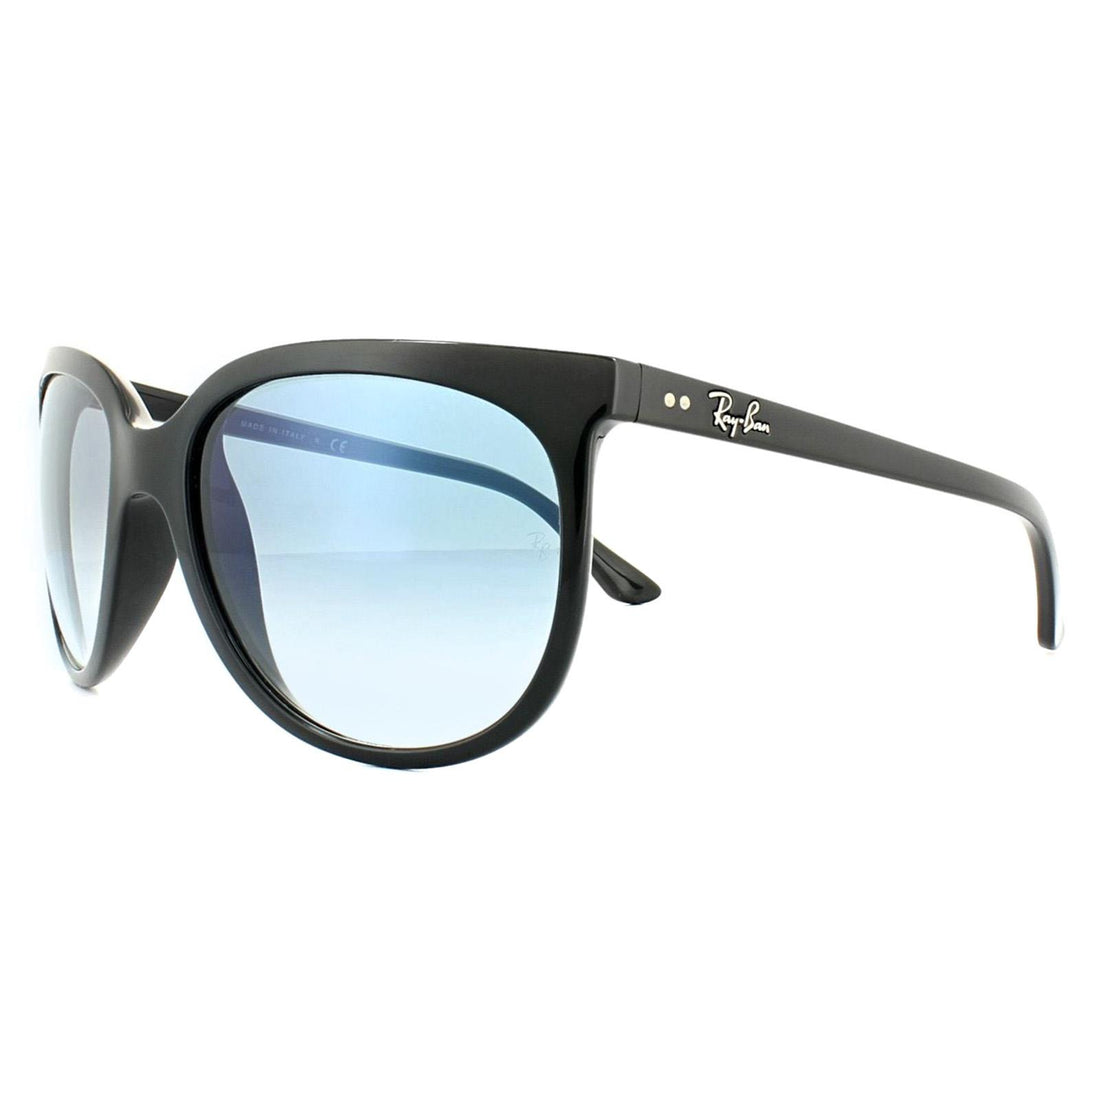 Ray-Ban Cats 1000 RB4126 Sunglasses